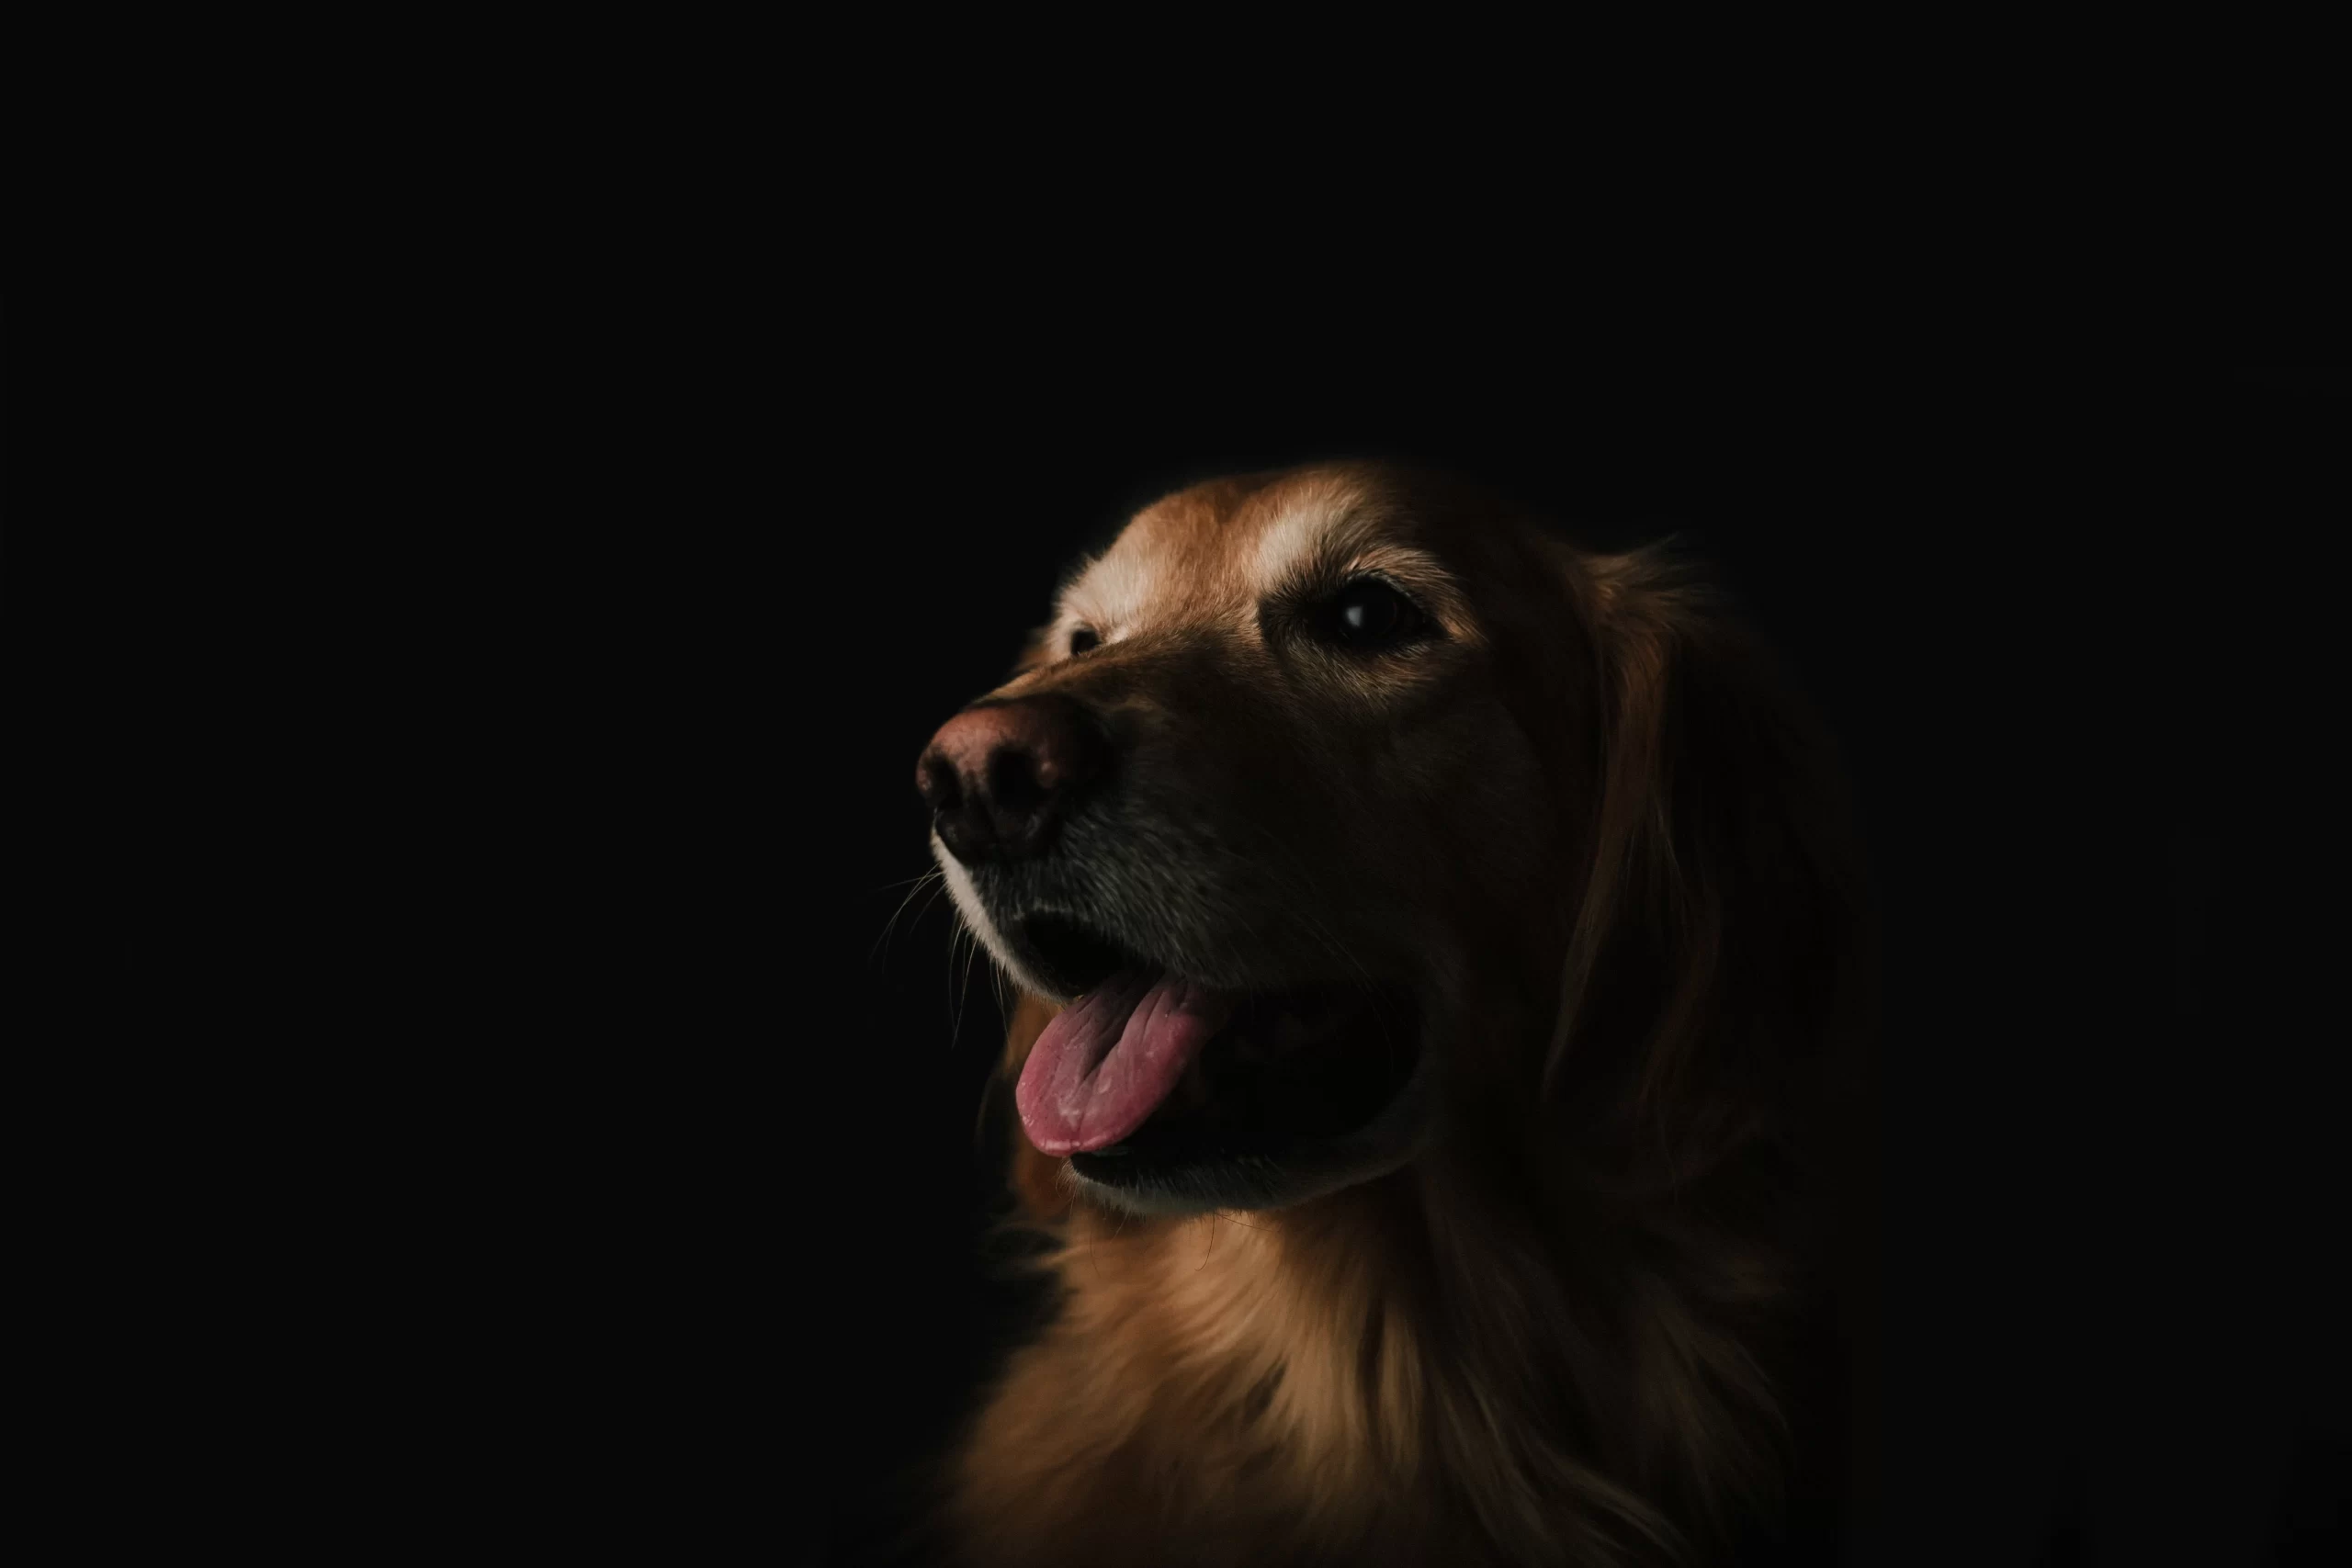 Published on March 4, 2016
Canon, EOS 5D Mark II
Free to use under the Unsplash License
A happy golden retriever with dramatic lighting by Brandon Day Unsplash